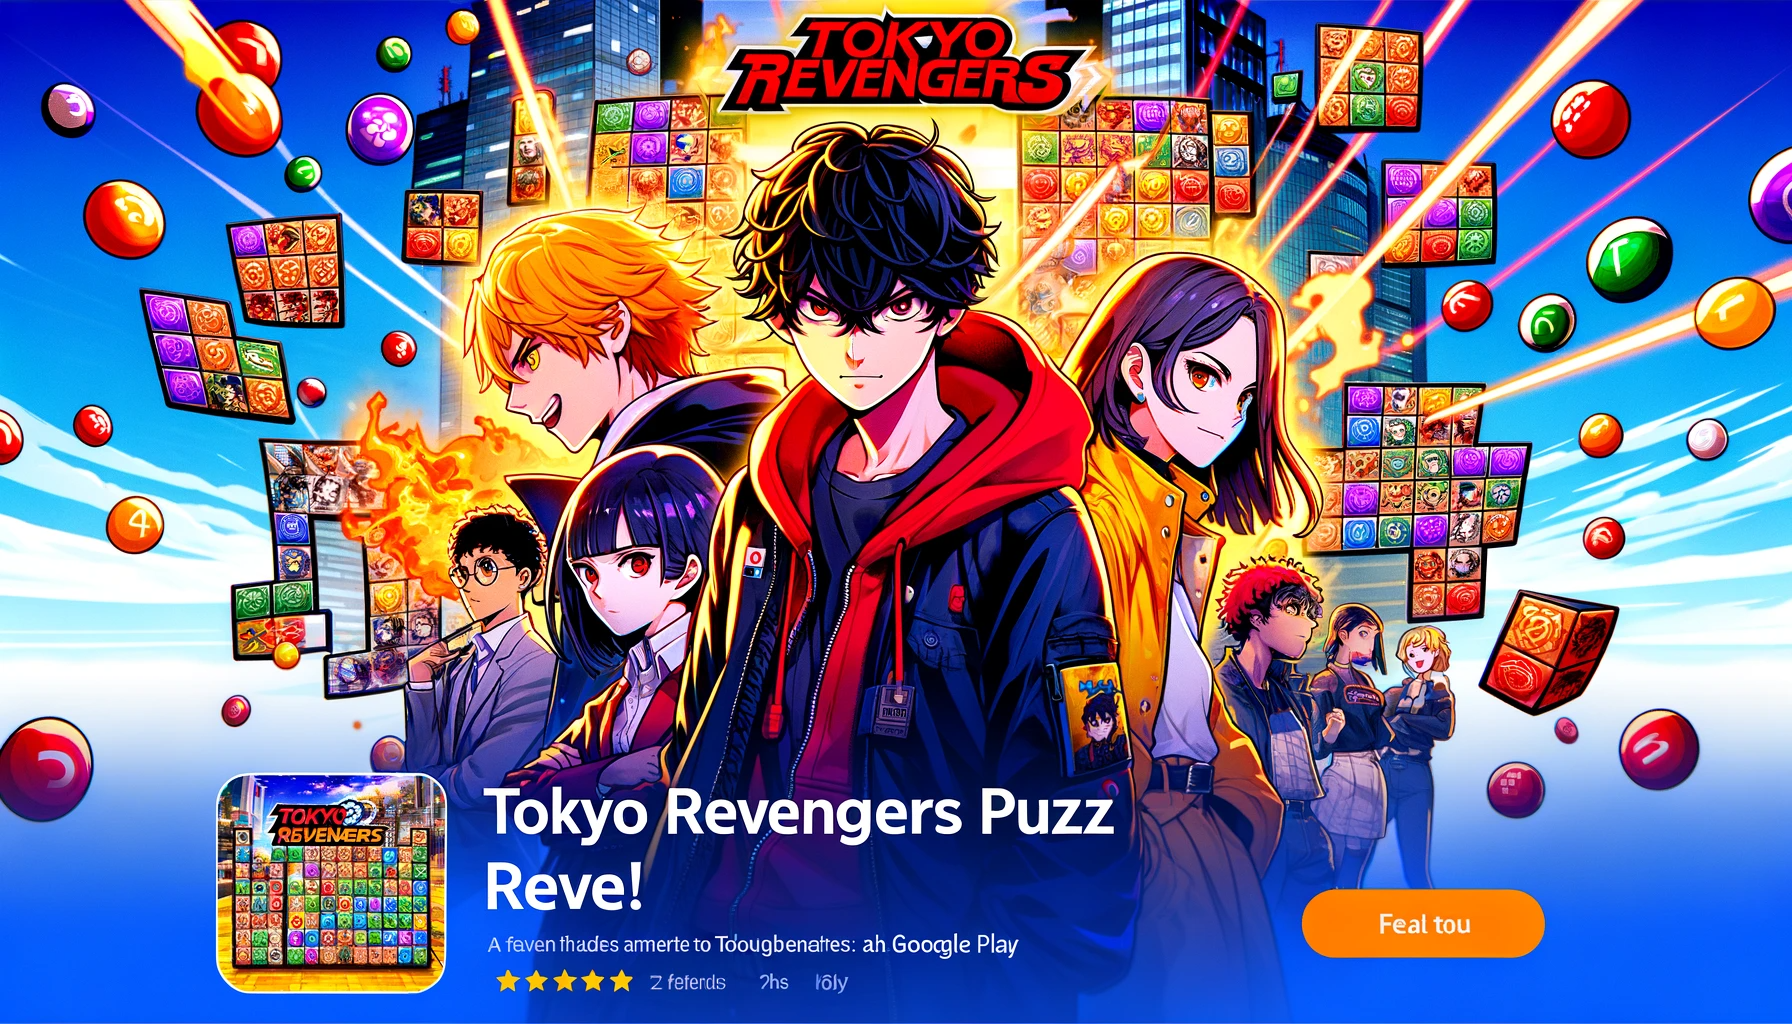 Tokyo Revengers PUZZ REVE Codes - Where Are They? - Droid Gamers